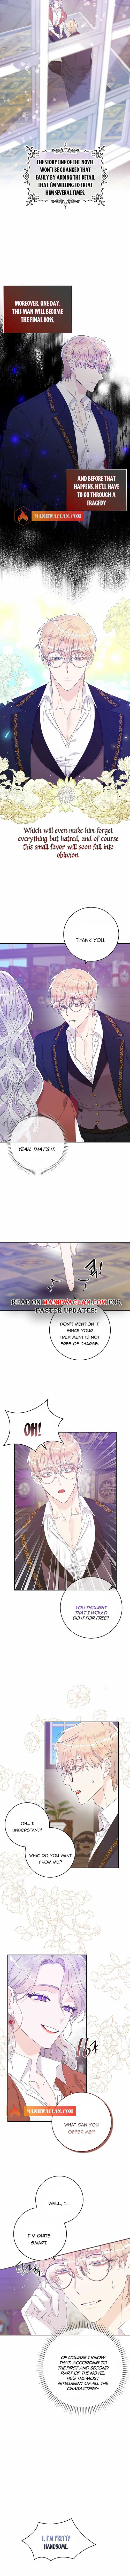 I Only Treat Villains Chapter 7 page 3 - MangaWeebs.in